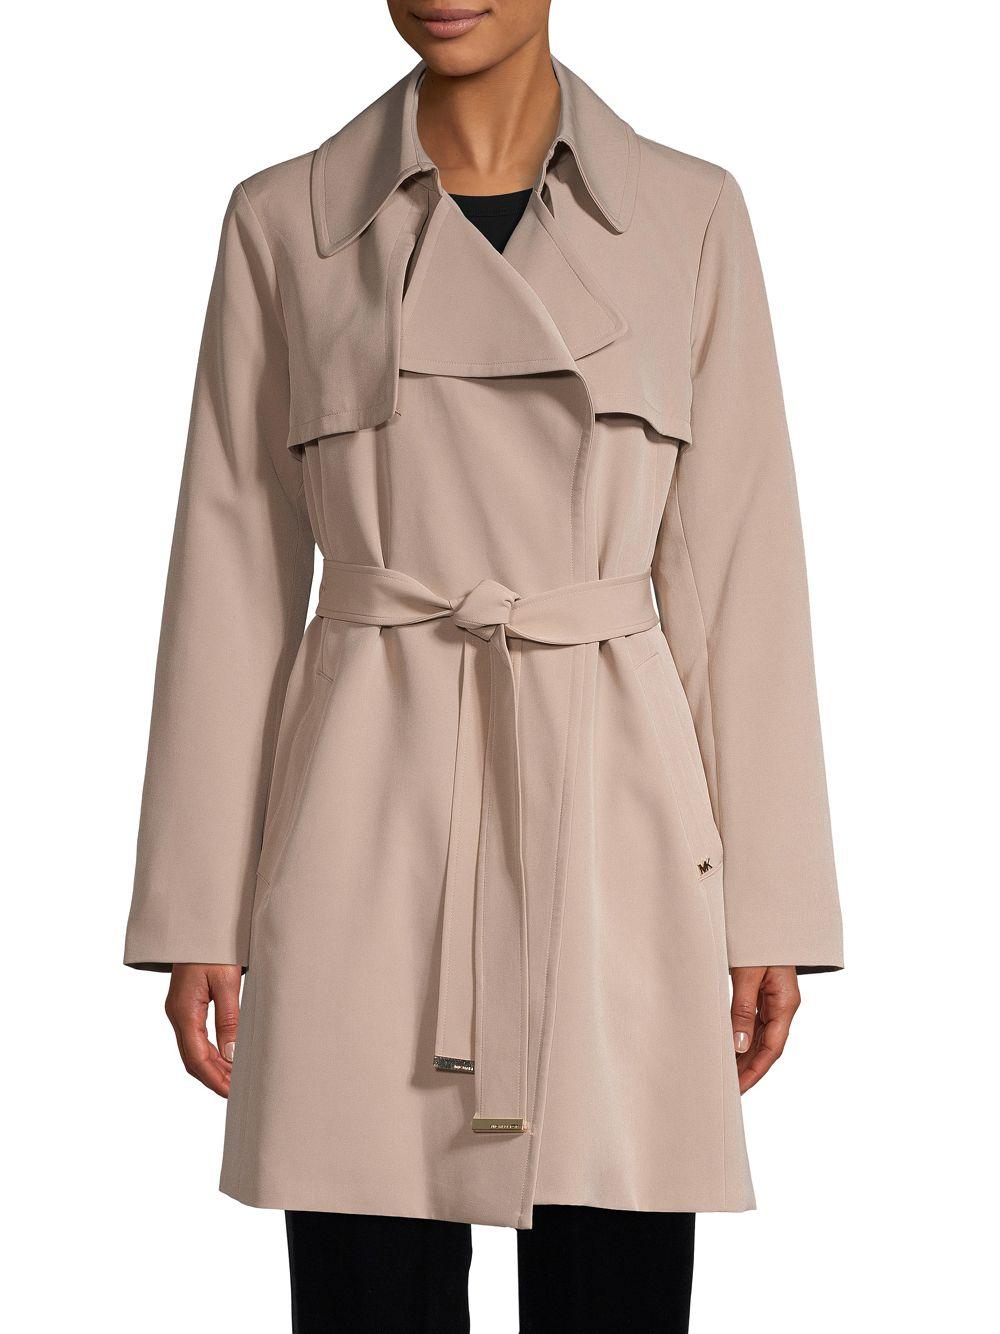 MICHAEL Michael Kors Synthetic Drape Trench Coat in Taupe (Brown) - Lyst